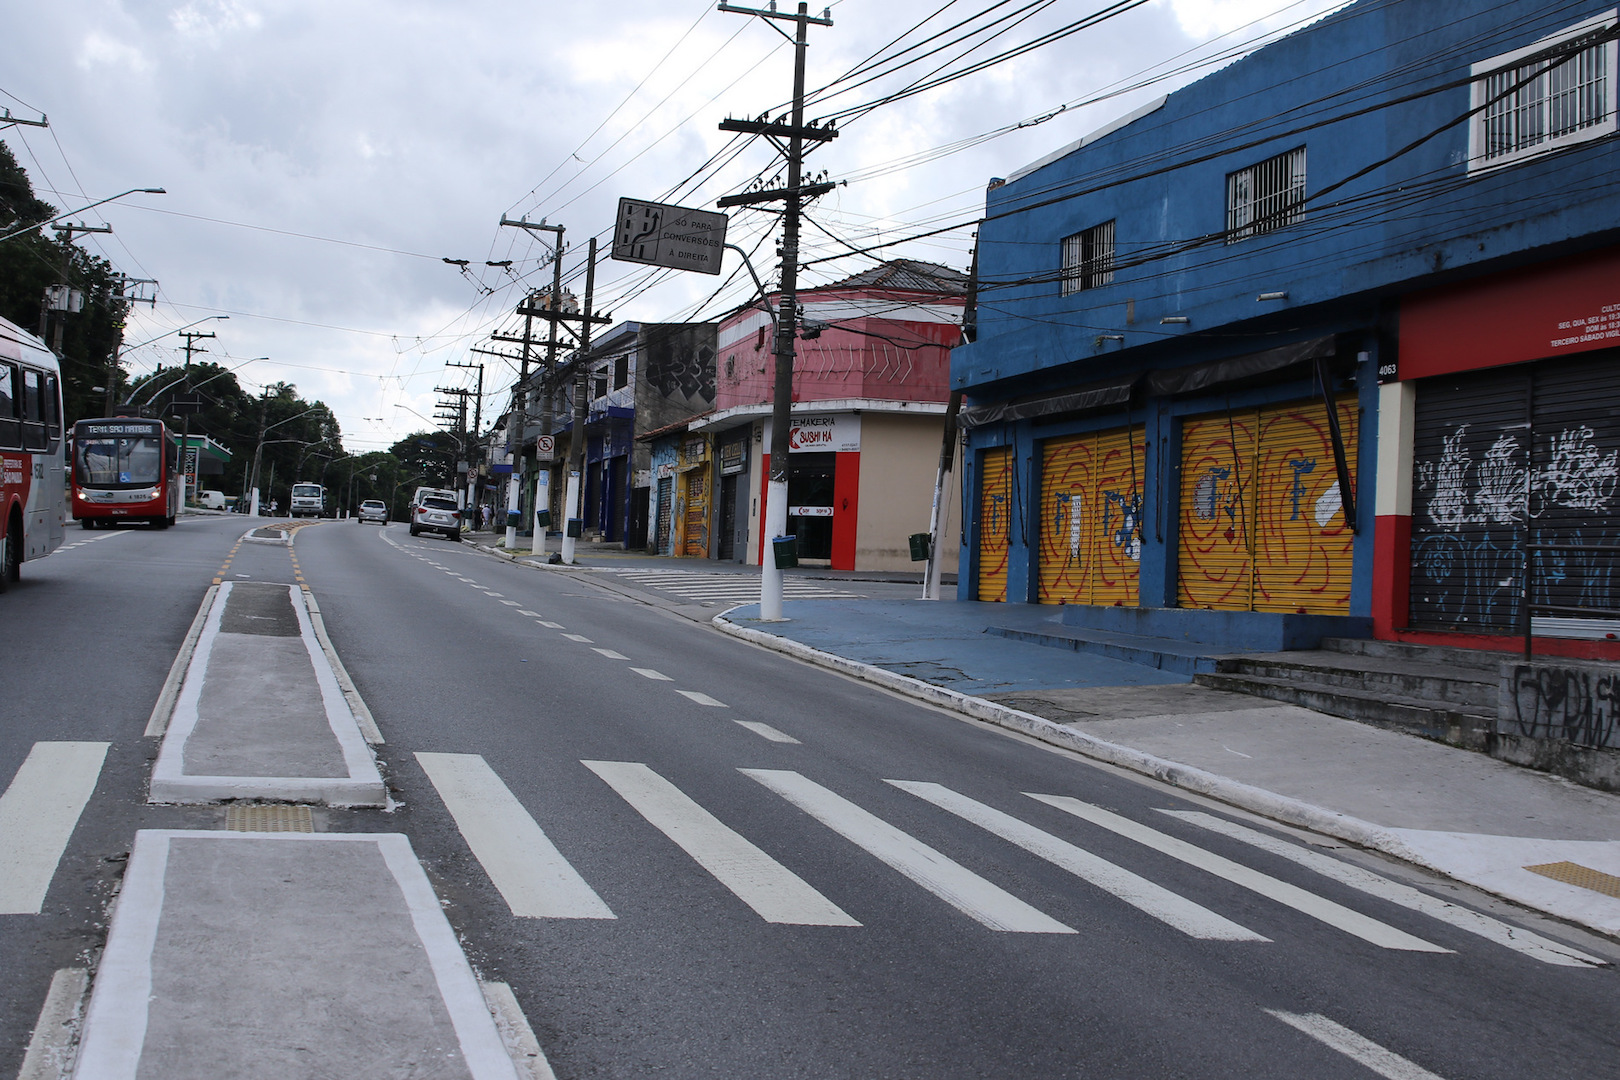 Brazil,Streets were nearly empty in São Paulo city this weekend with residents fearing Covid-19.